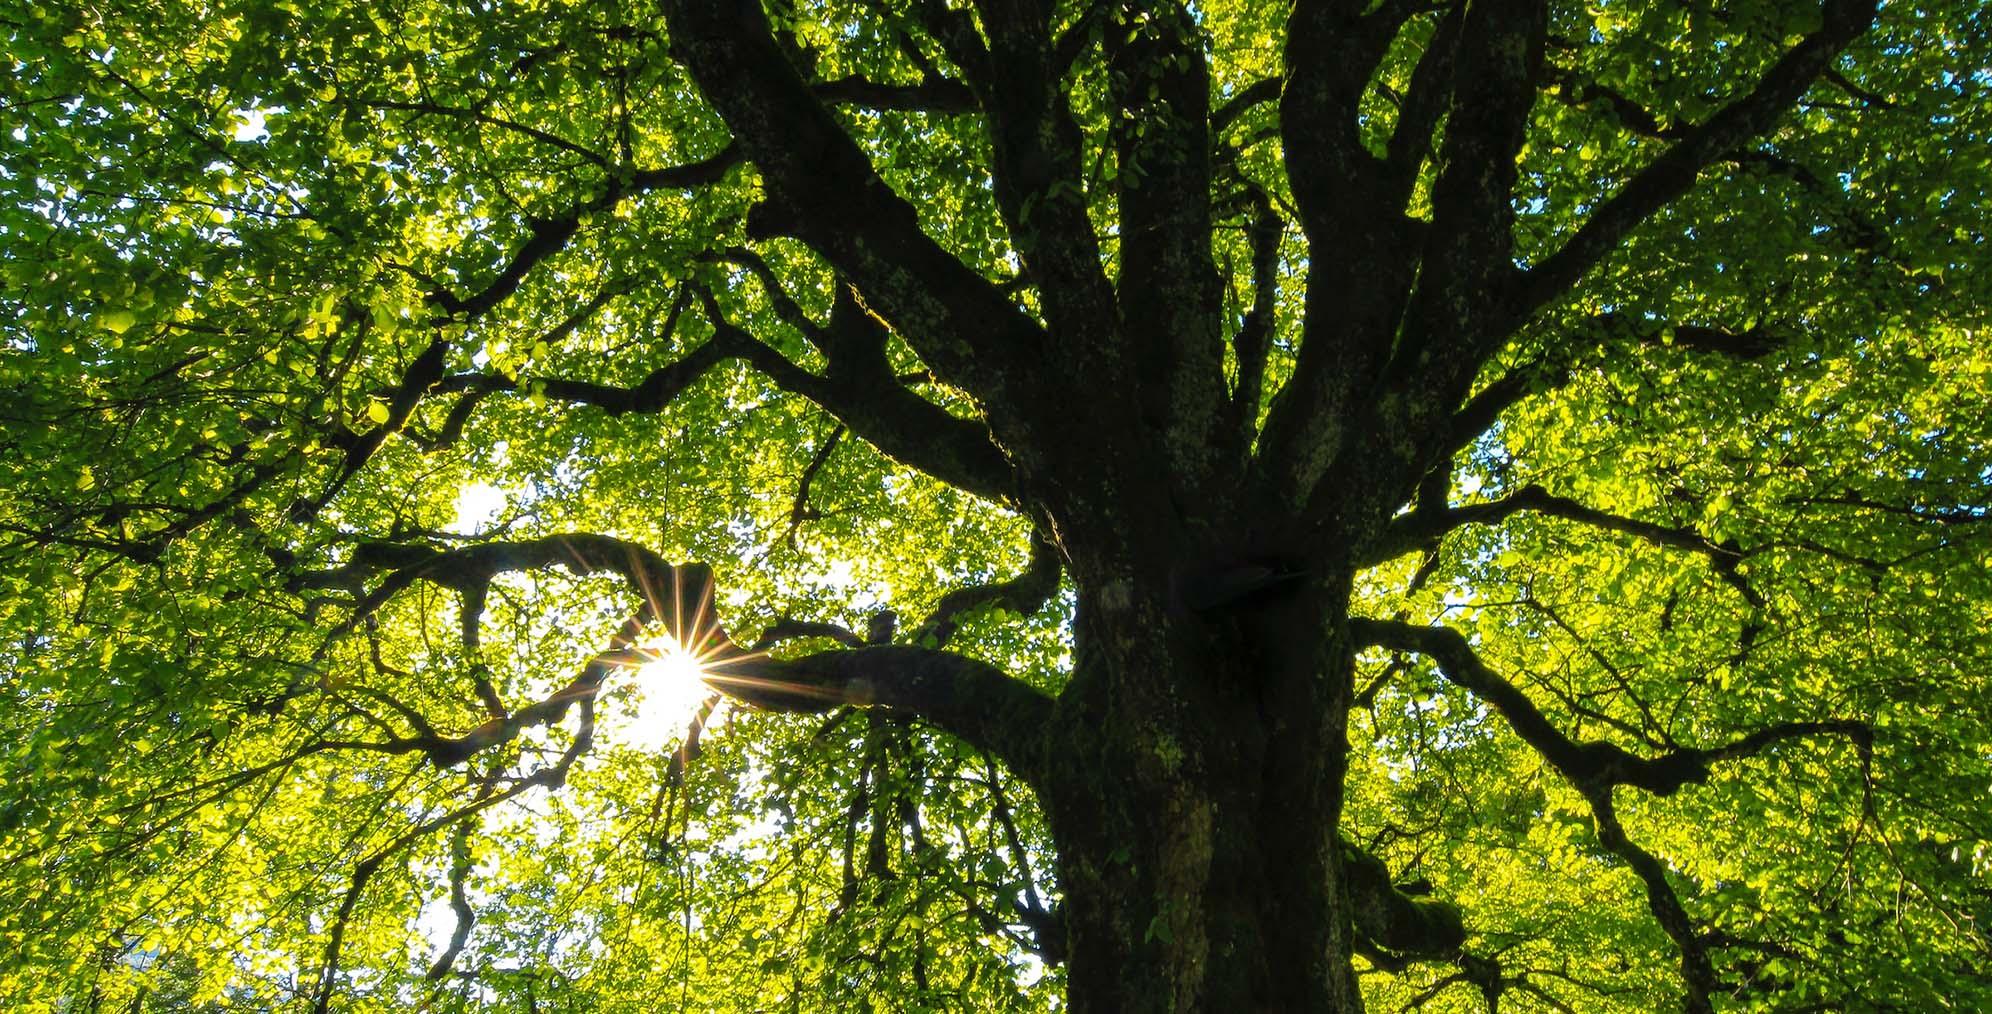 A photo taken from beneath a tree looking up at its branches with the sun shining through the leaves.